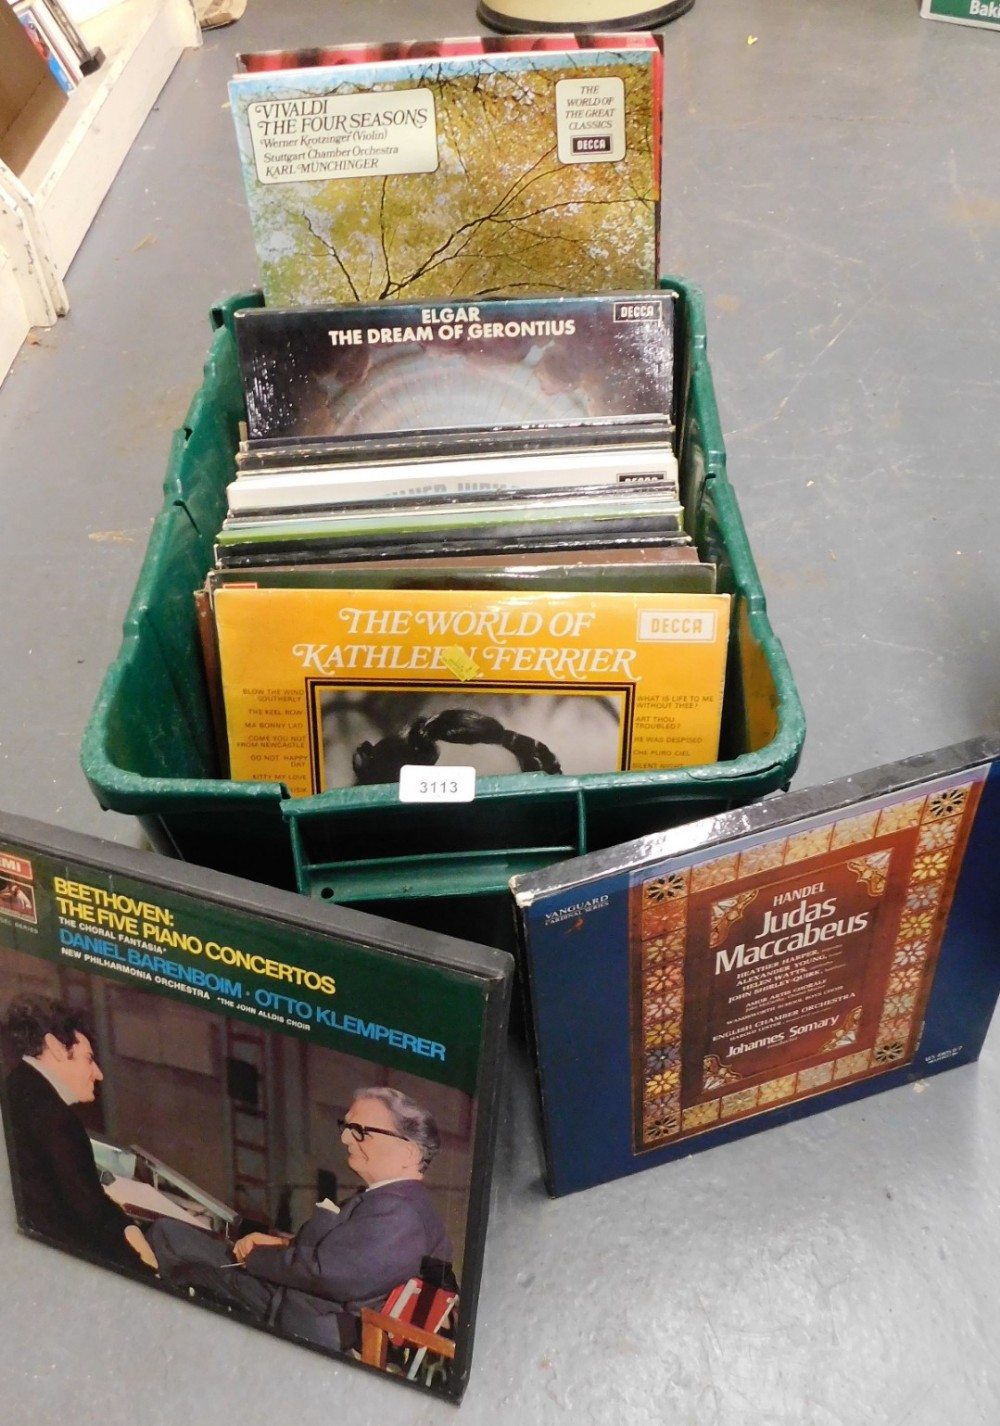 Various LP records, to include classical and piano concerto records, Pablo Casals, Bach, etc. (1 box